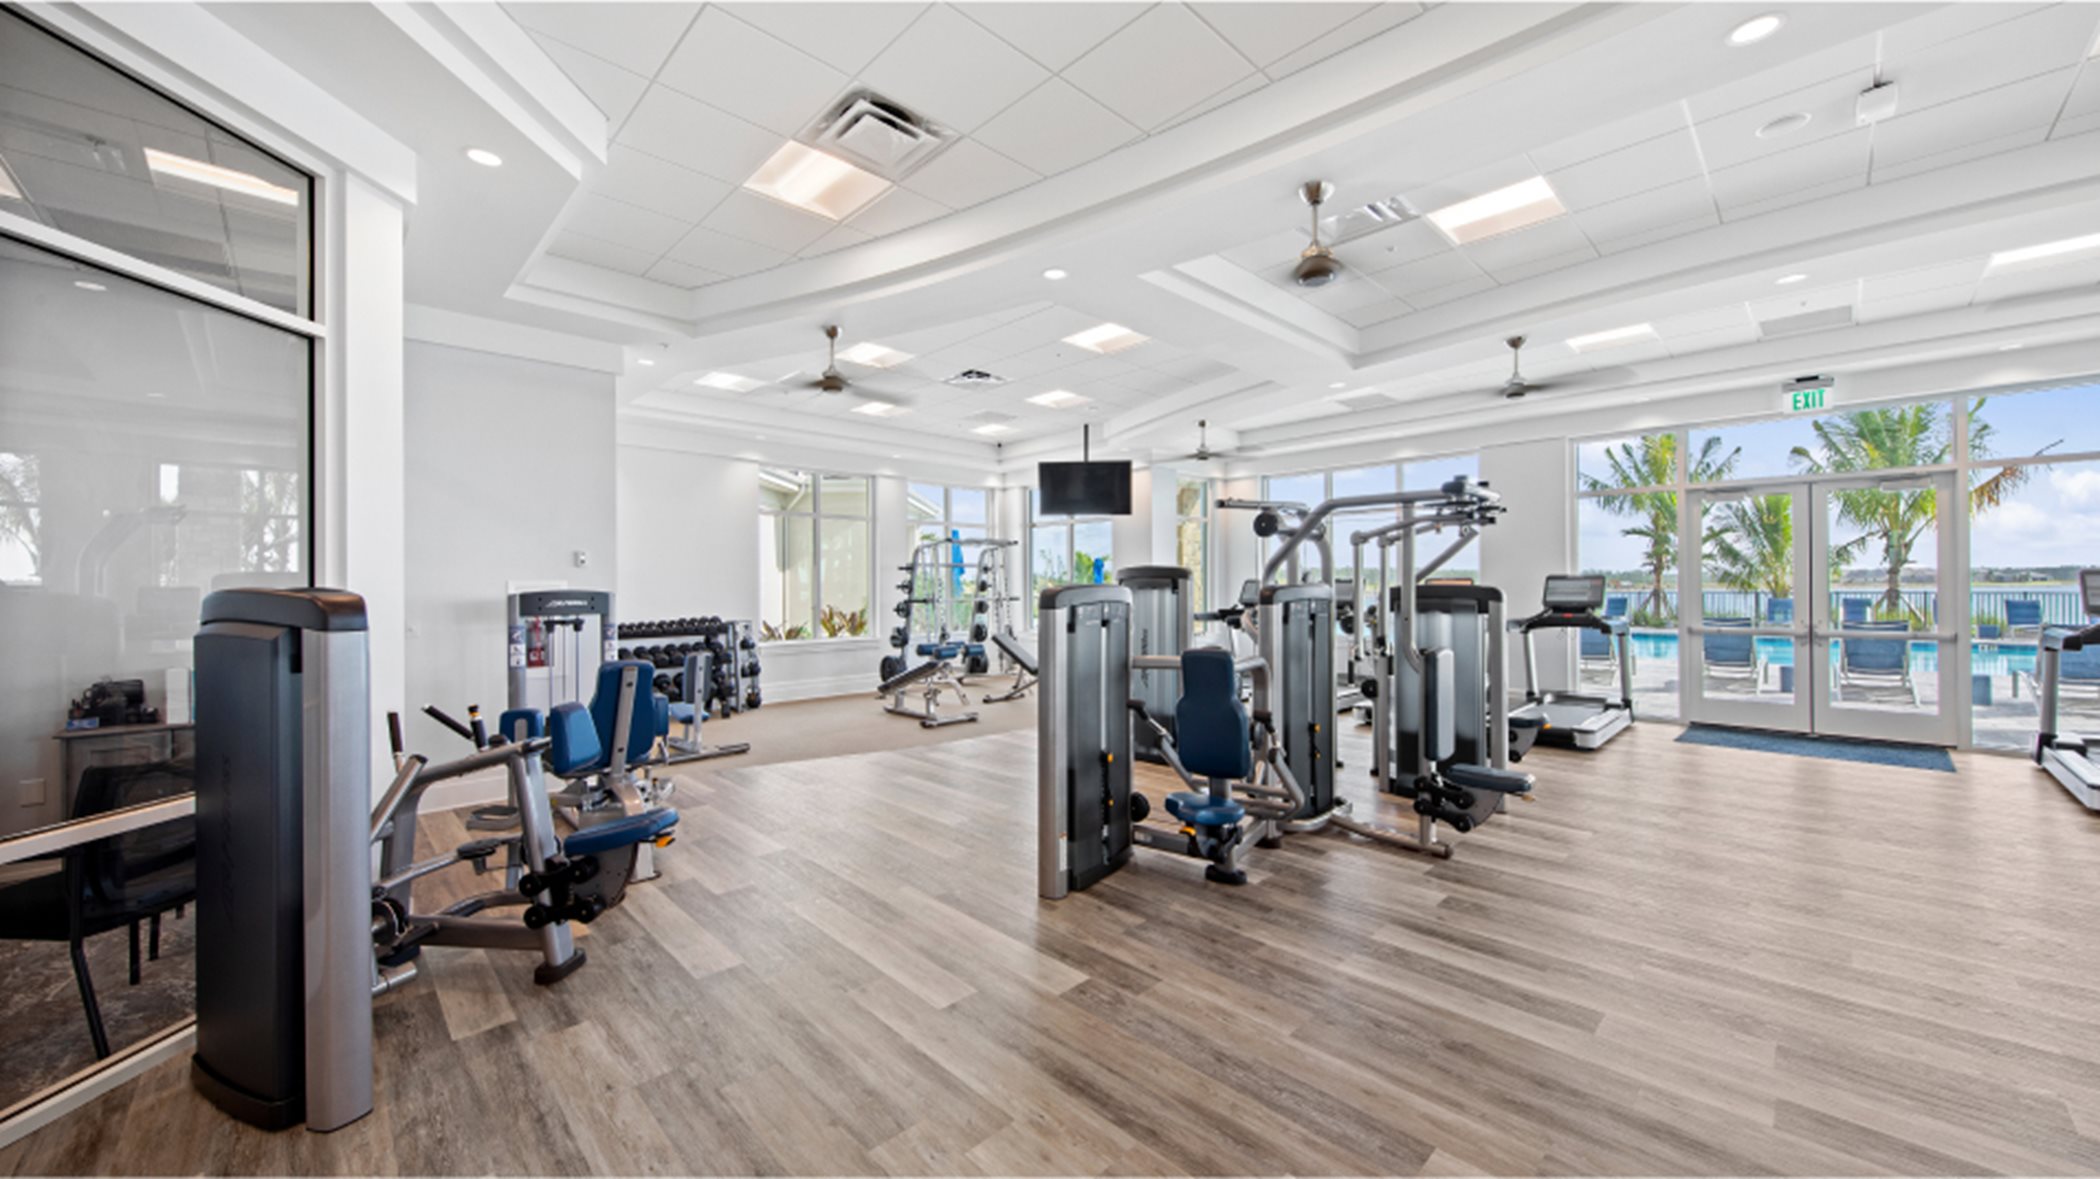 WildBlue sports club exercise room